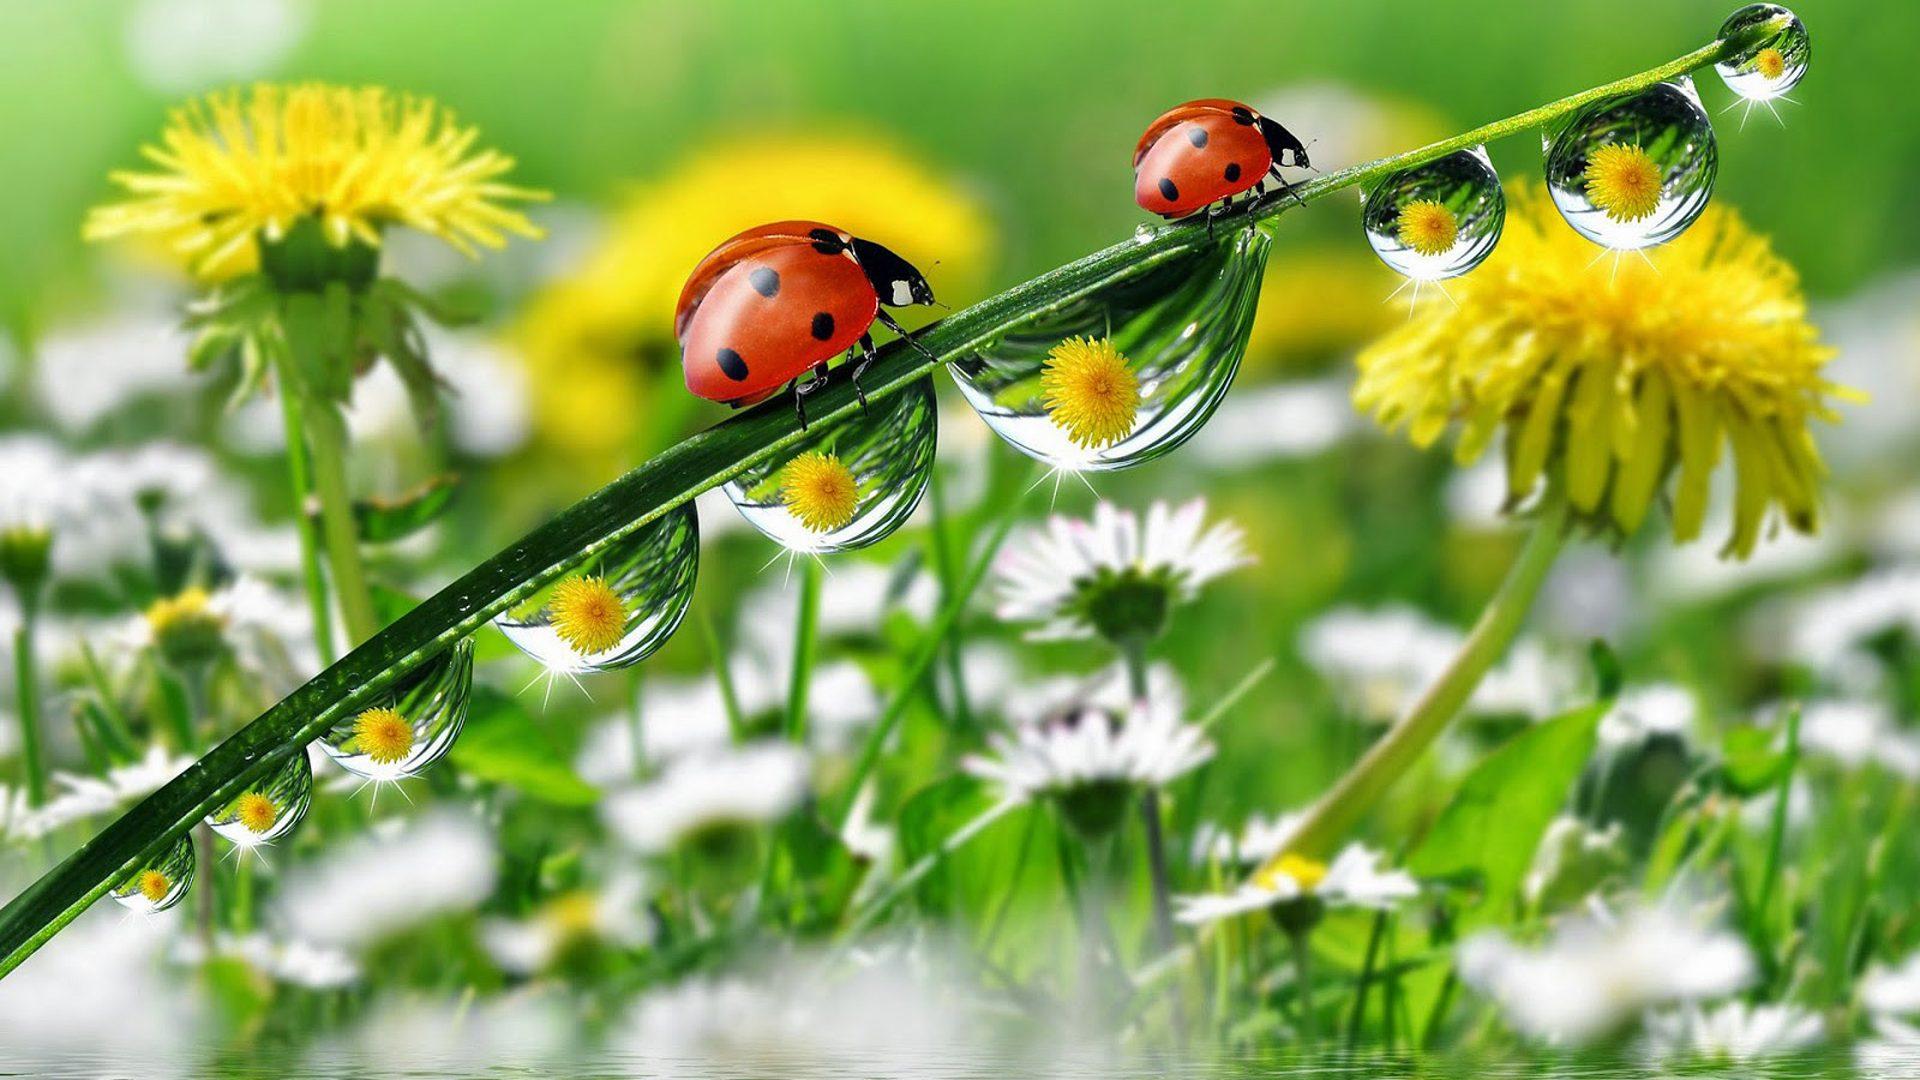 Morning Dew Drops Grass With Water Ladybug Yellow Meadow